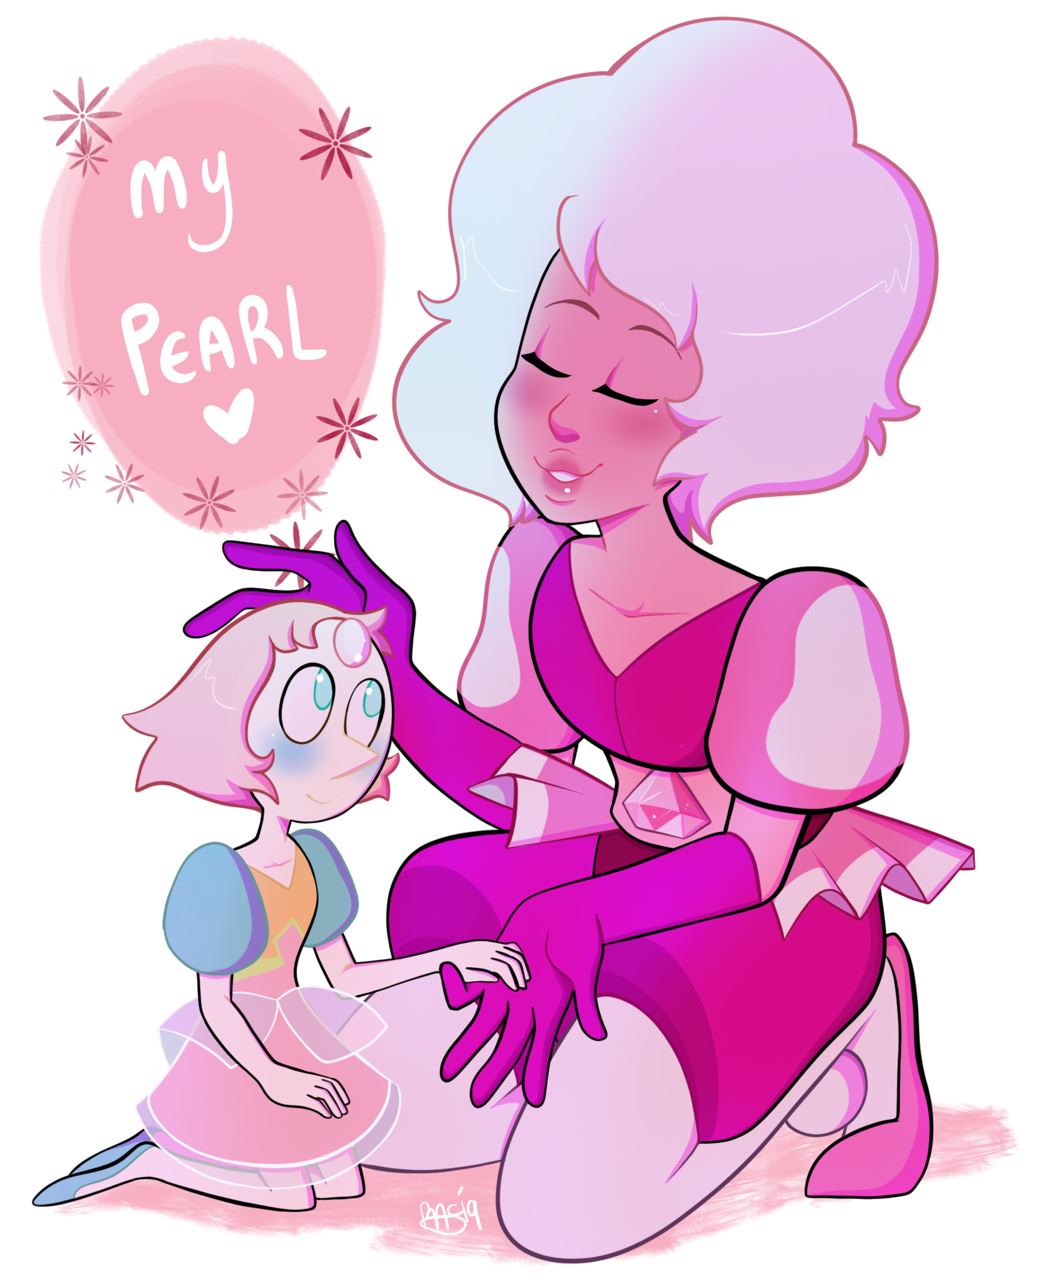 Pearl and Pink Diamond won the drawing poll over on my Twitter!
If you guys want to partake in the drawing polls too, or over all follow me where I’m more active, please follow me there!